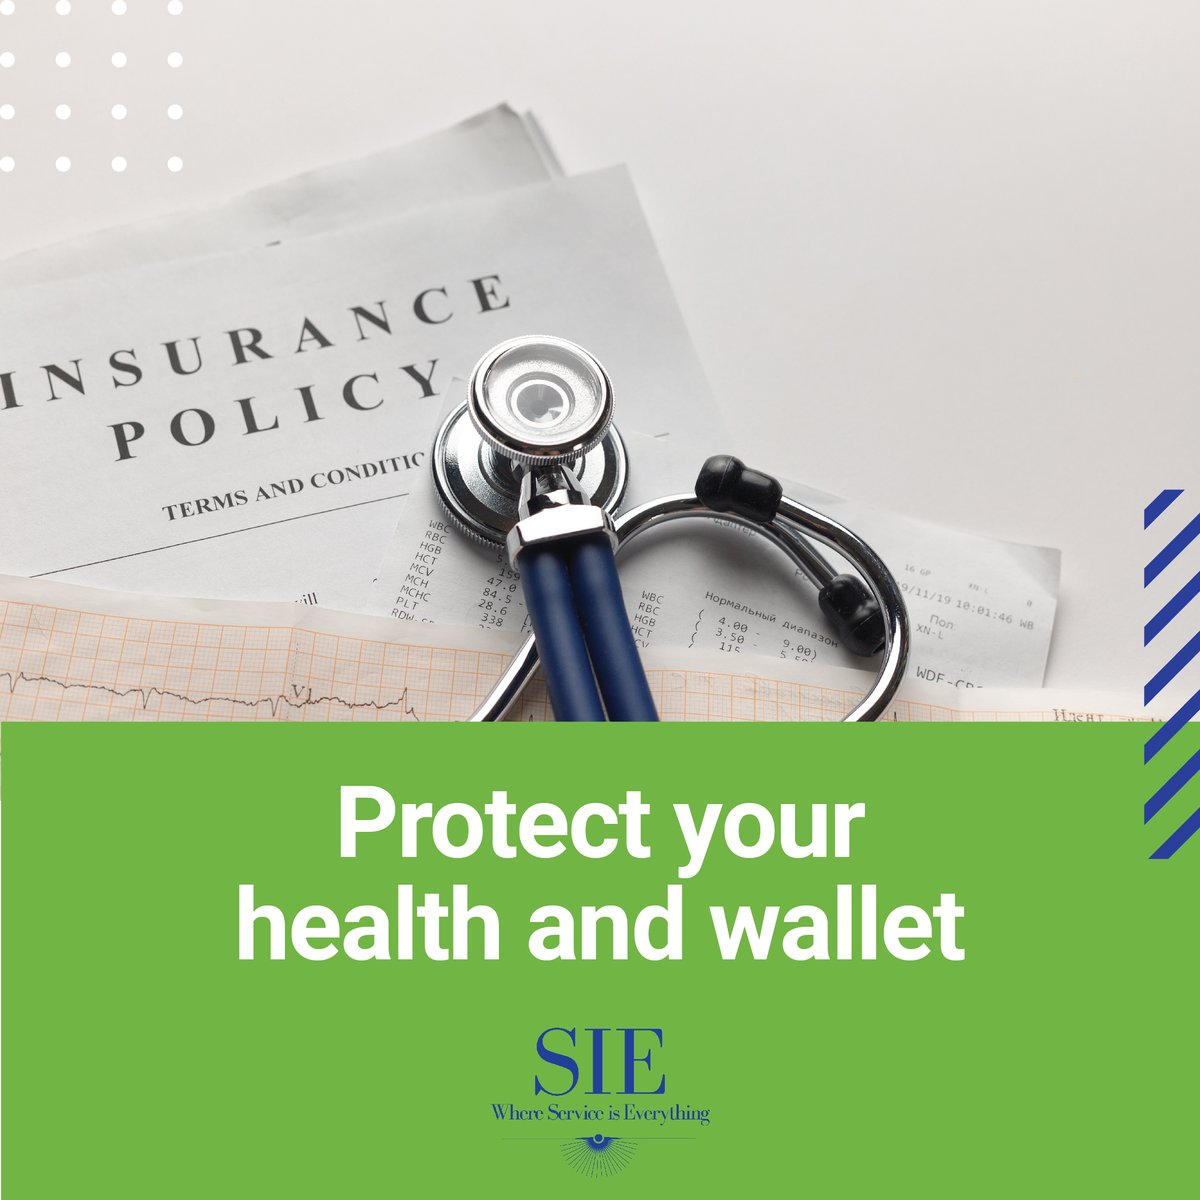 Protect your health and wallet with our selection of affordable health insurance plans. Get started today to find the right one for you! #InsuranceOptions #AffordableHealthPlans #LocalInsuranceAgency